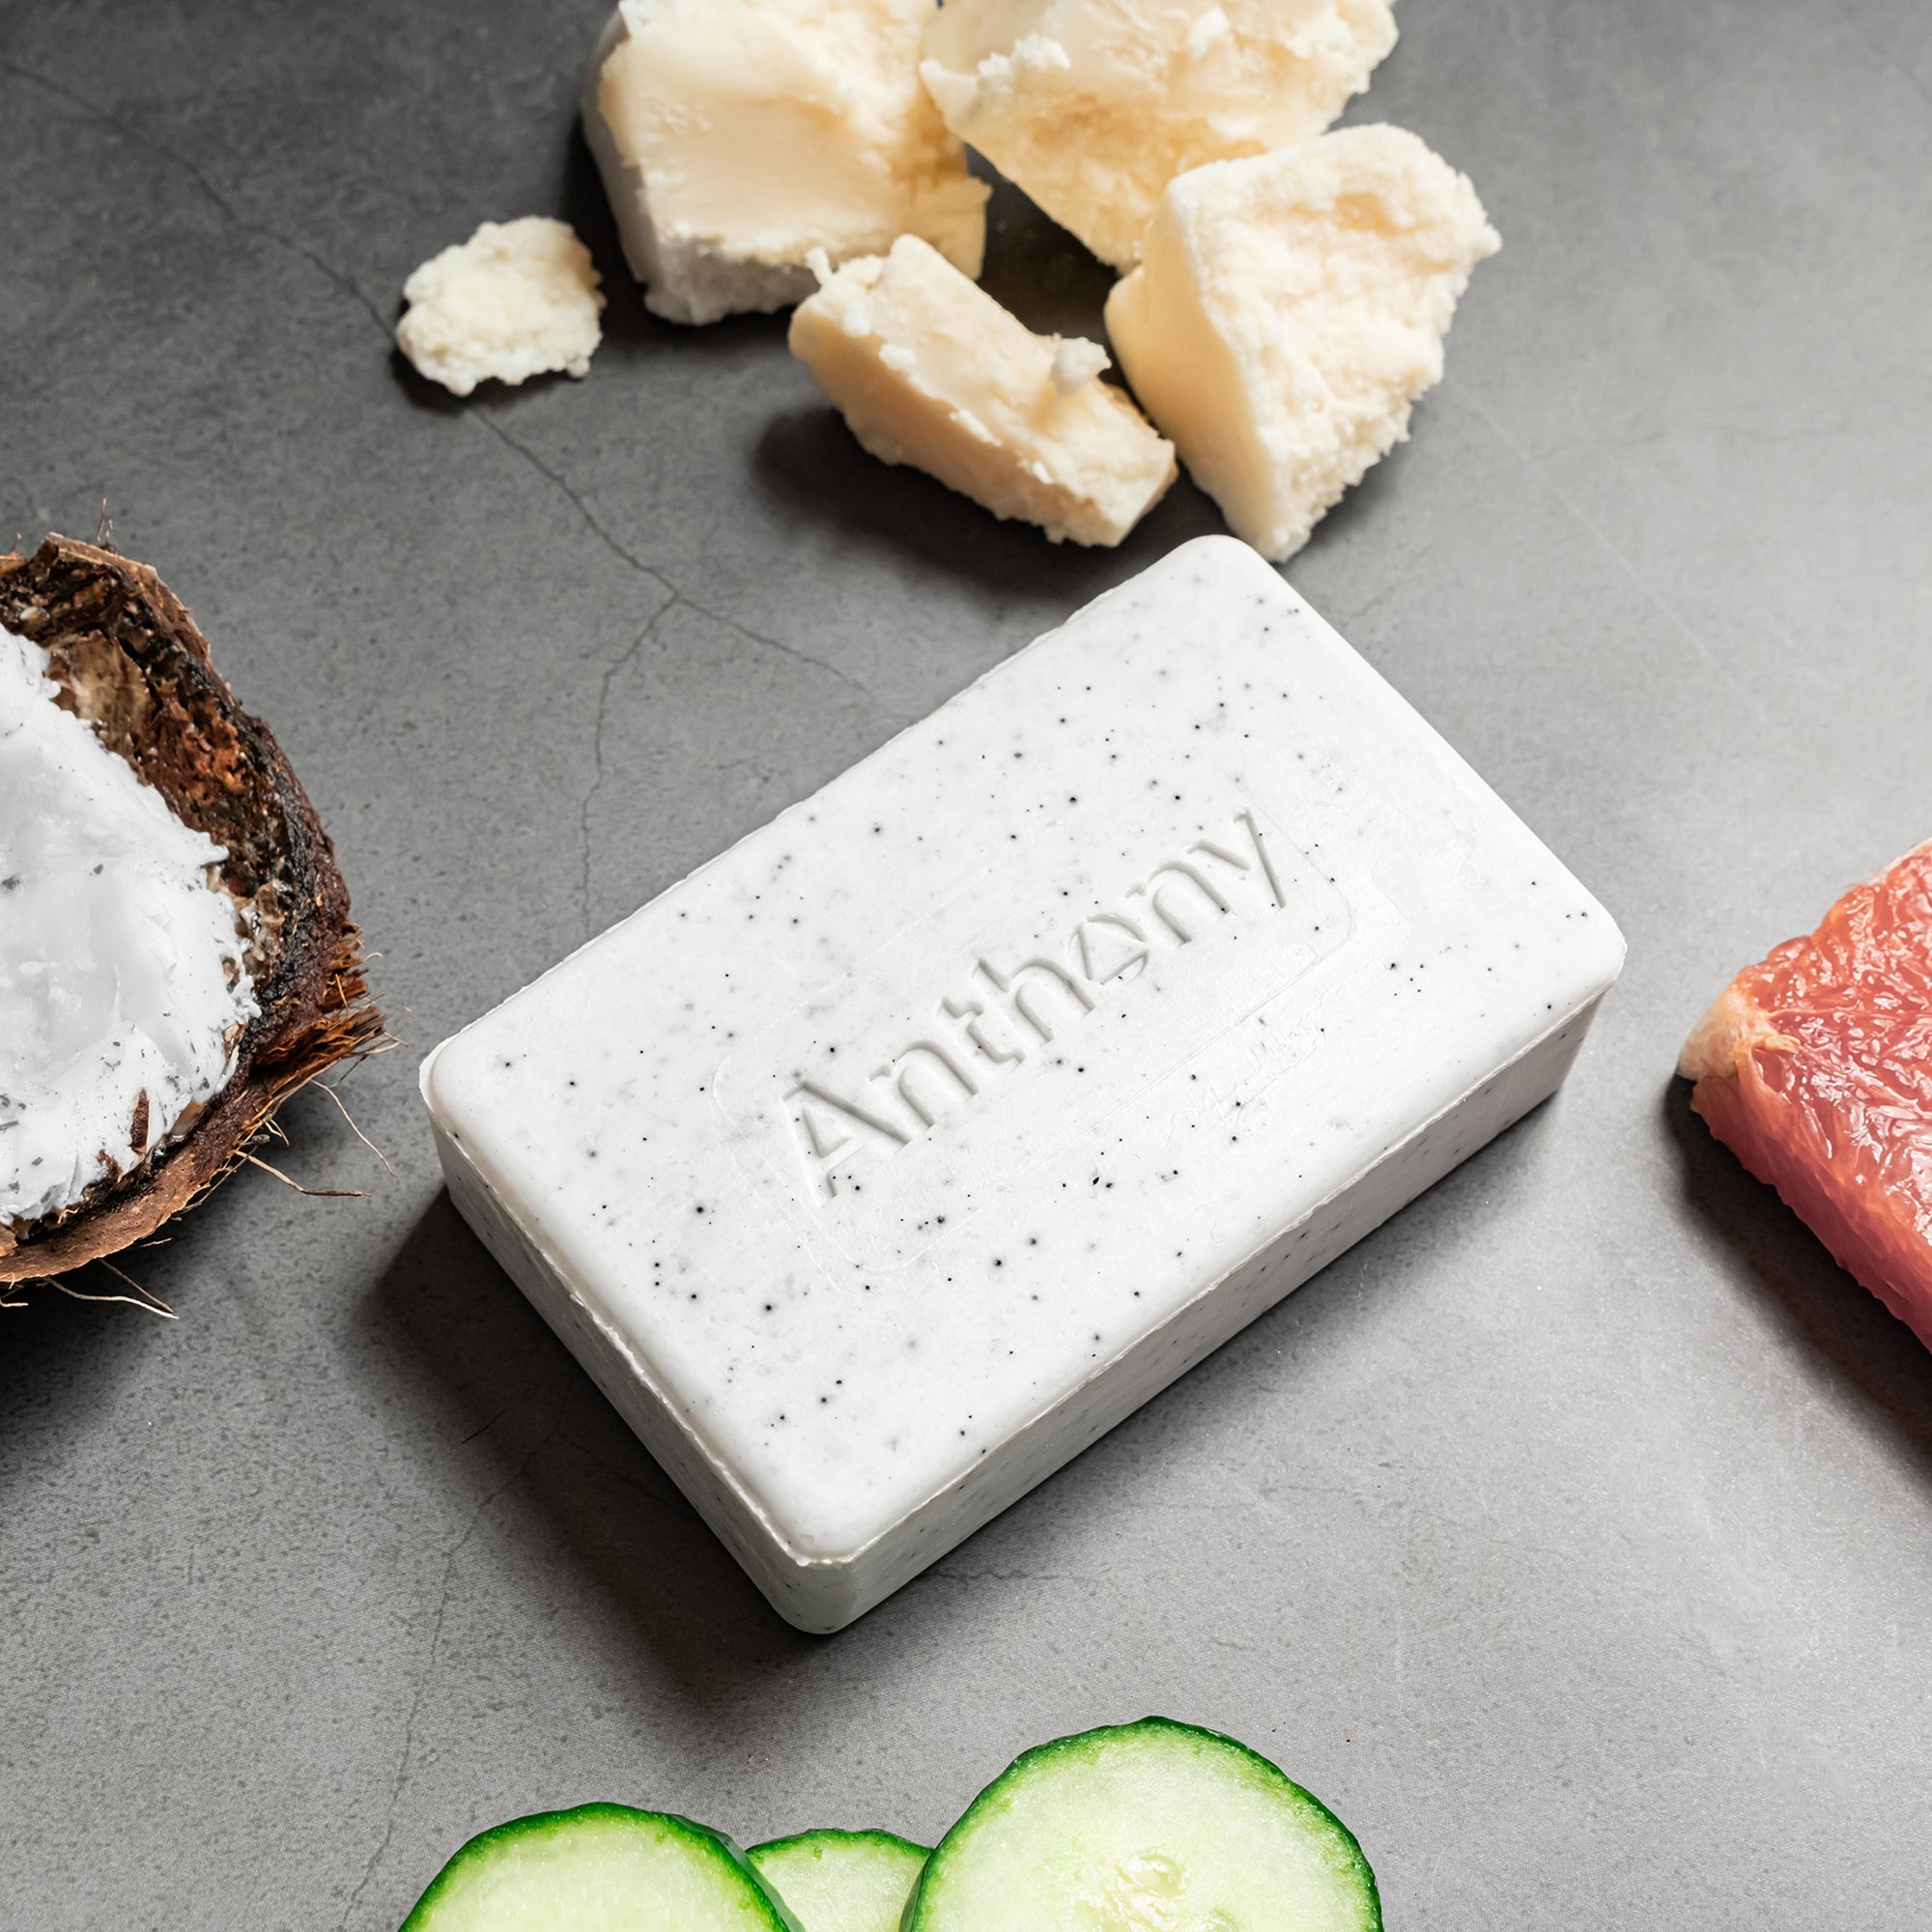 
                  
                    Exfoliating + Cleansing Bar 3-Pack ($60 Value)
                  
                